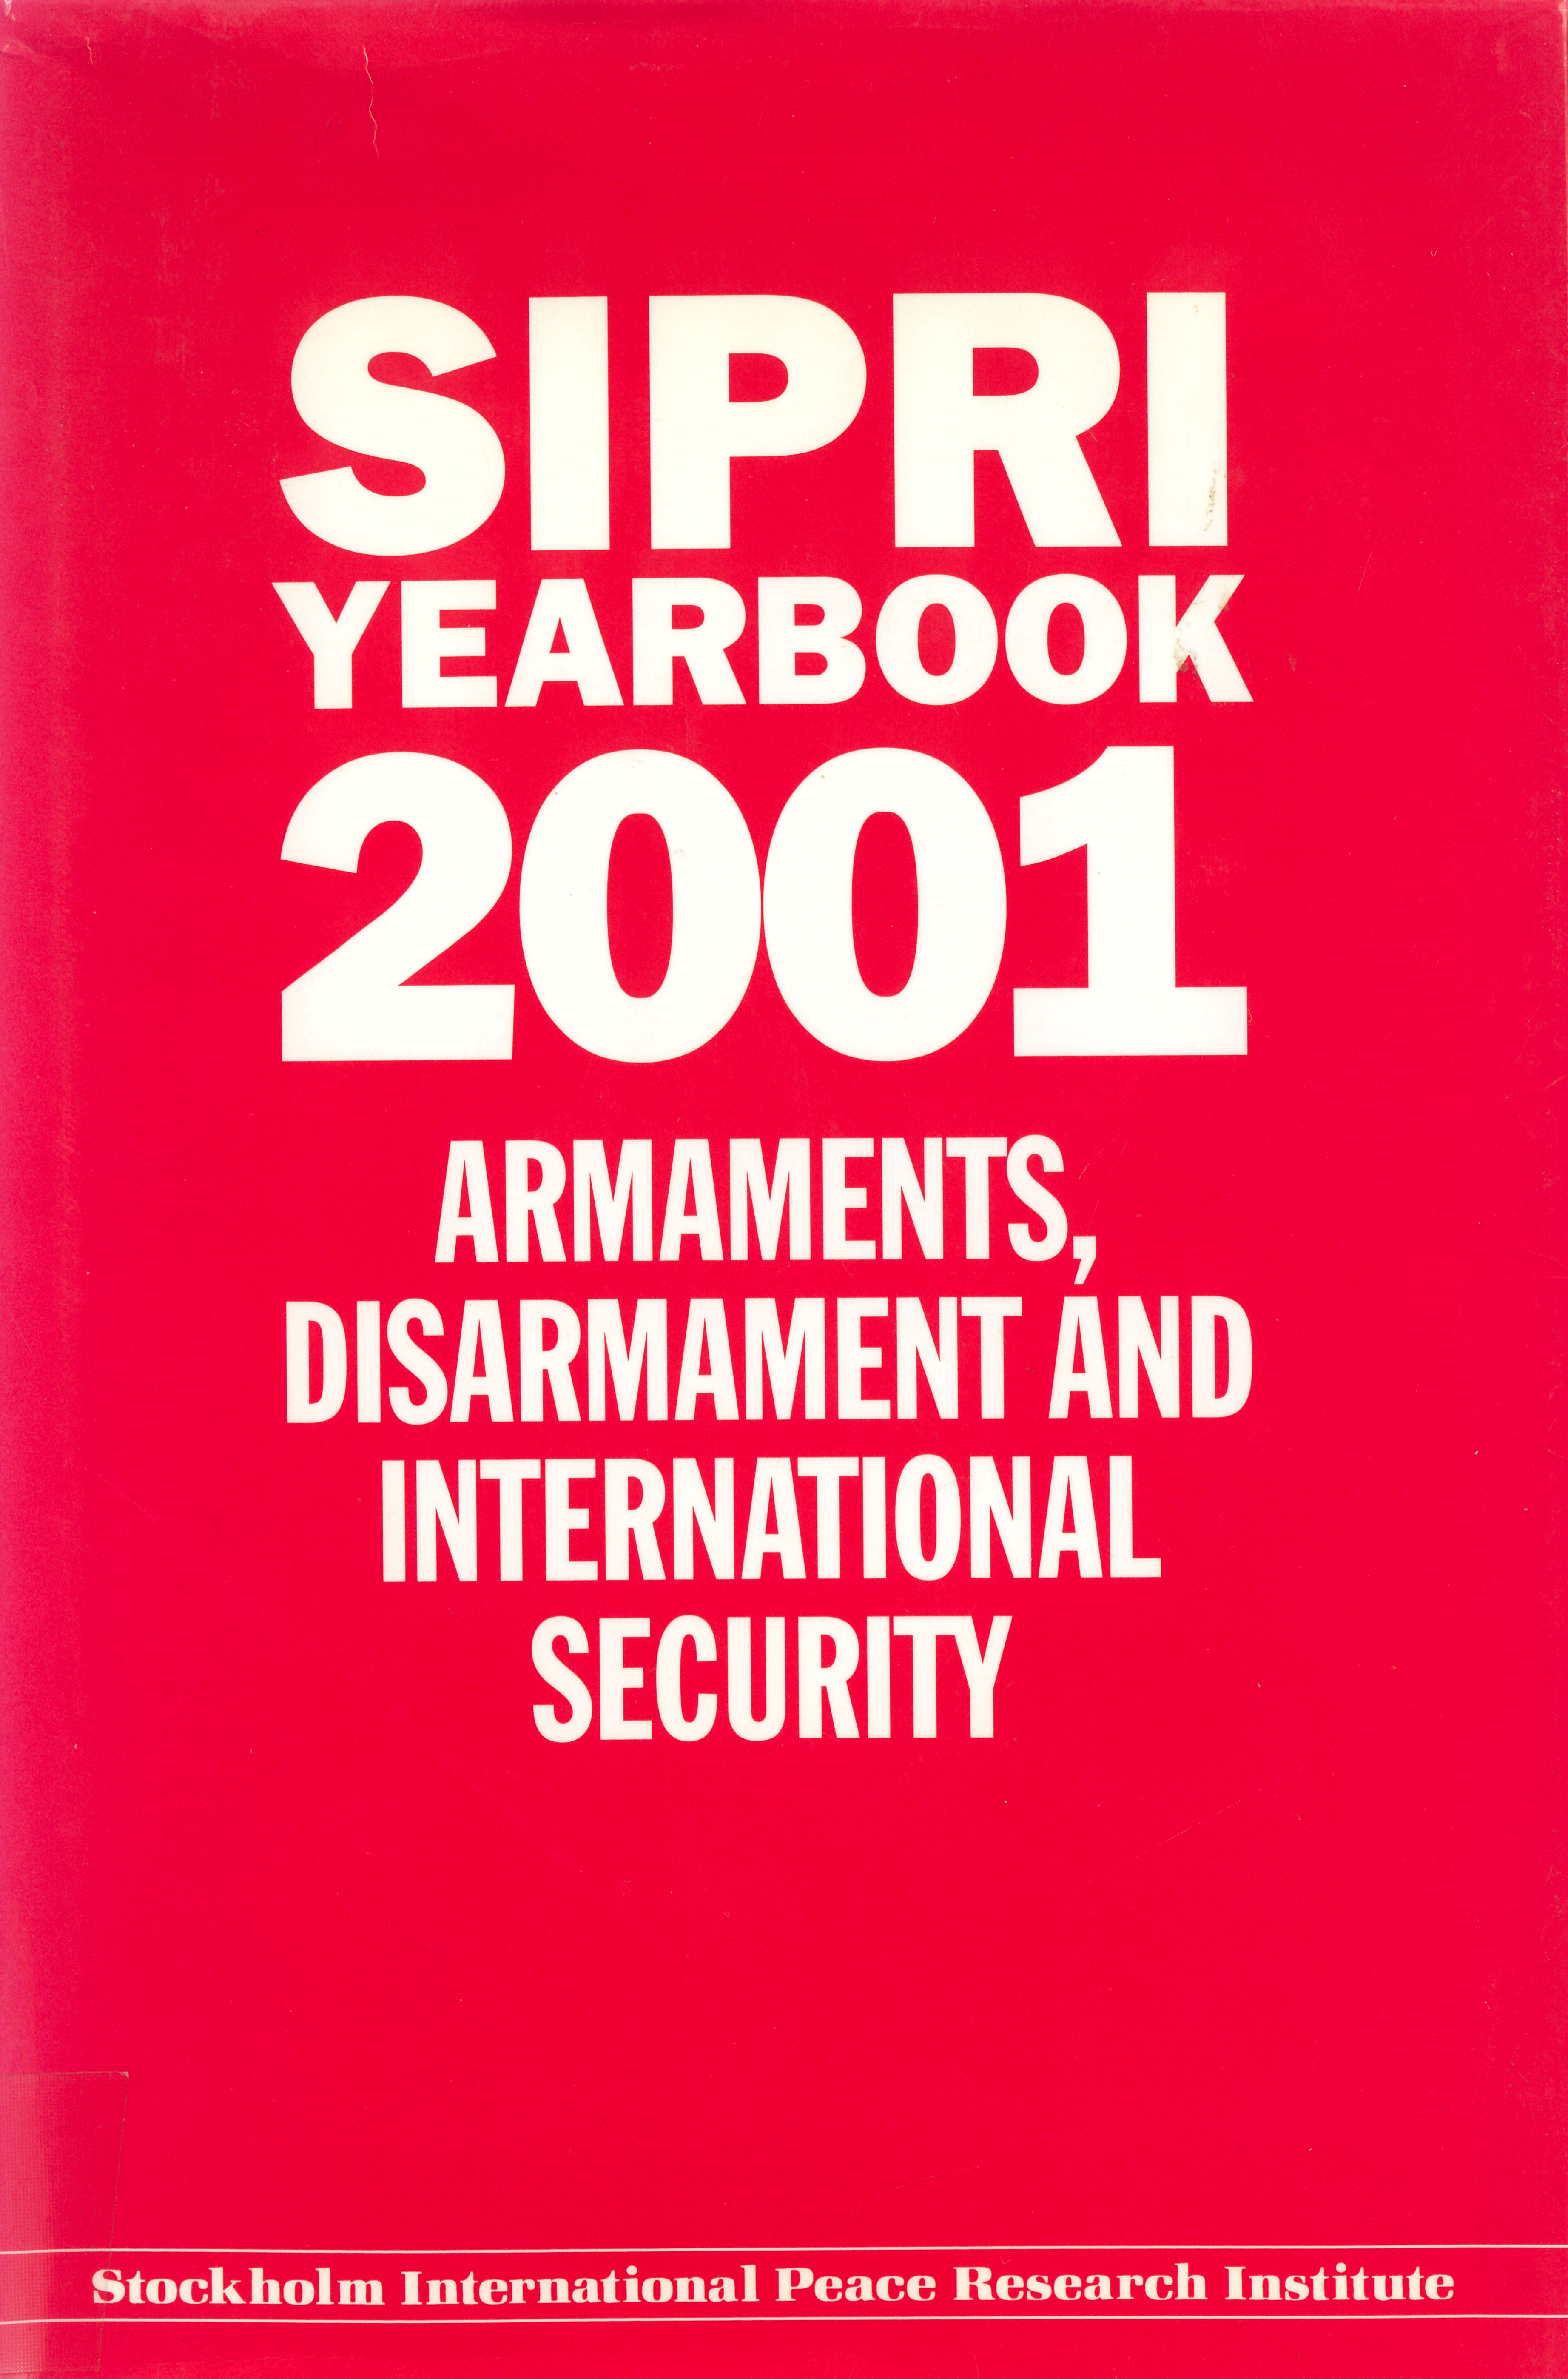 SIPRI yearbook 2001 cover